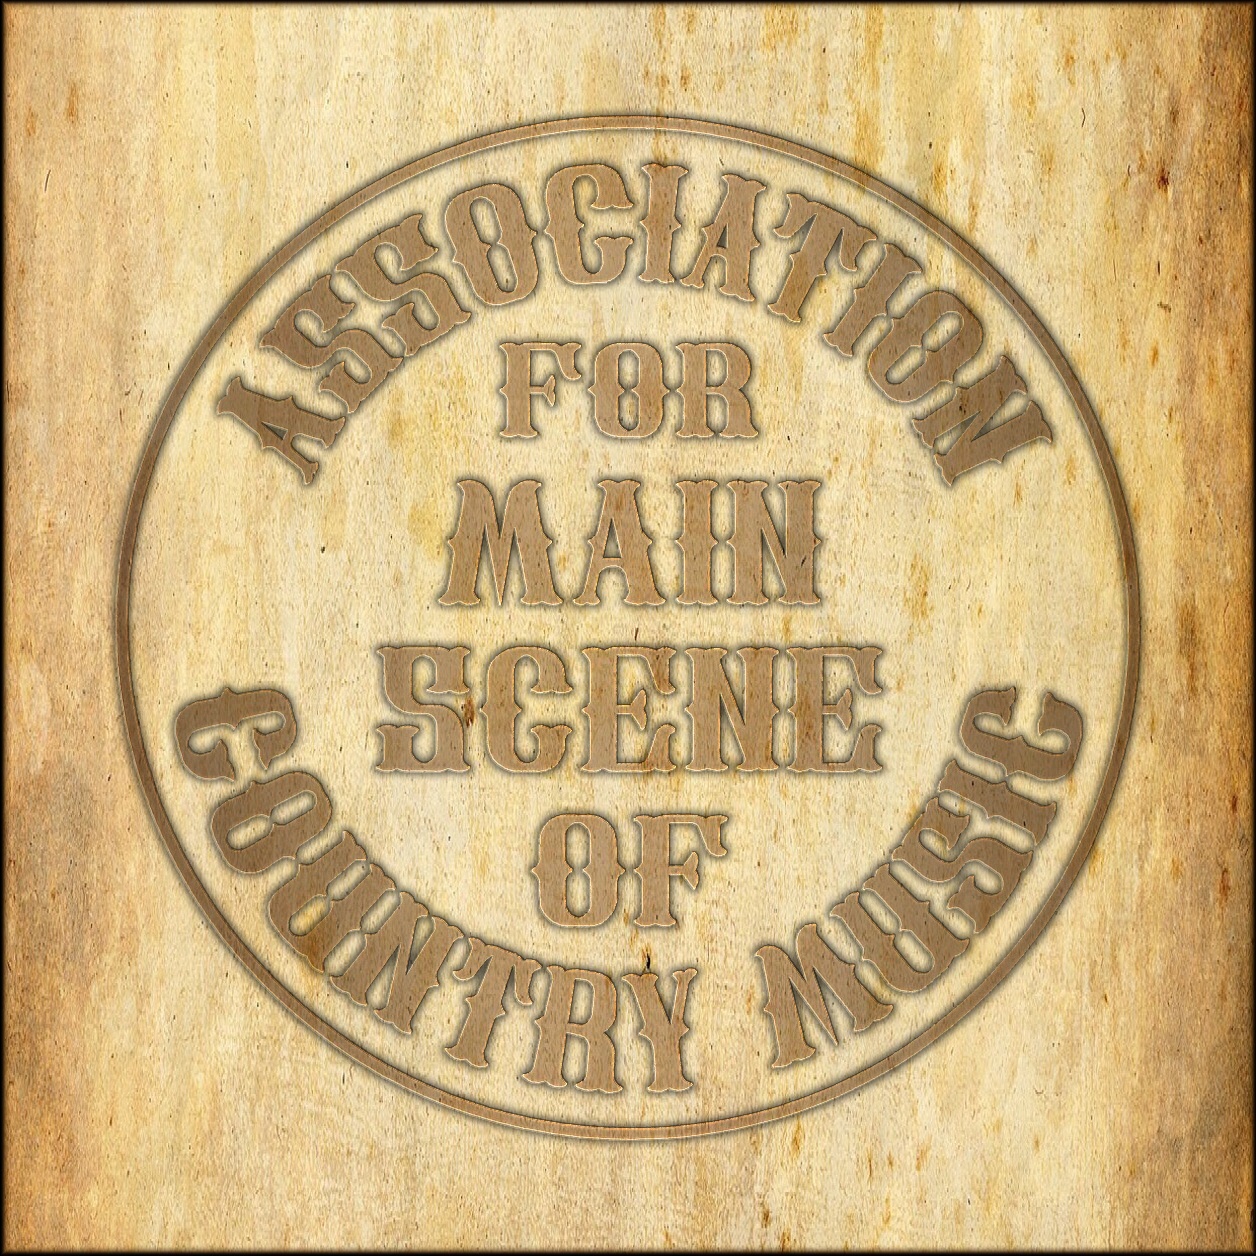 04 005 - ASSOCIATION FOR MAIN SCENE OF COUNTRY MUSIC